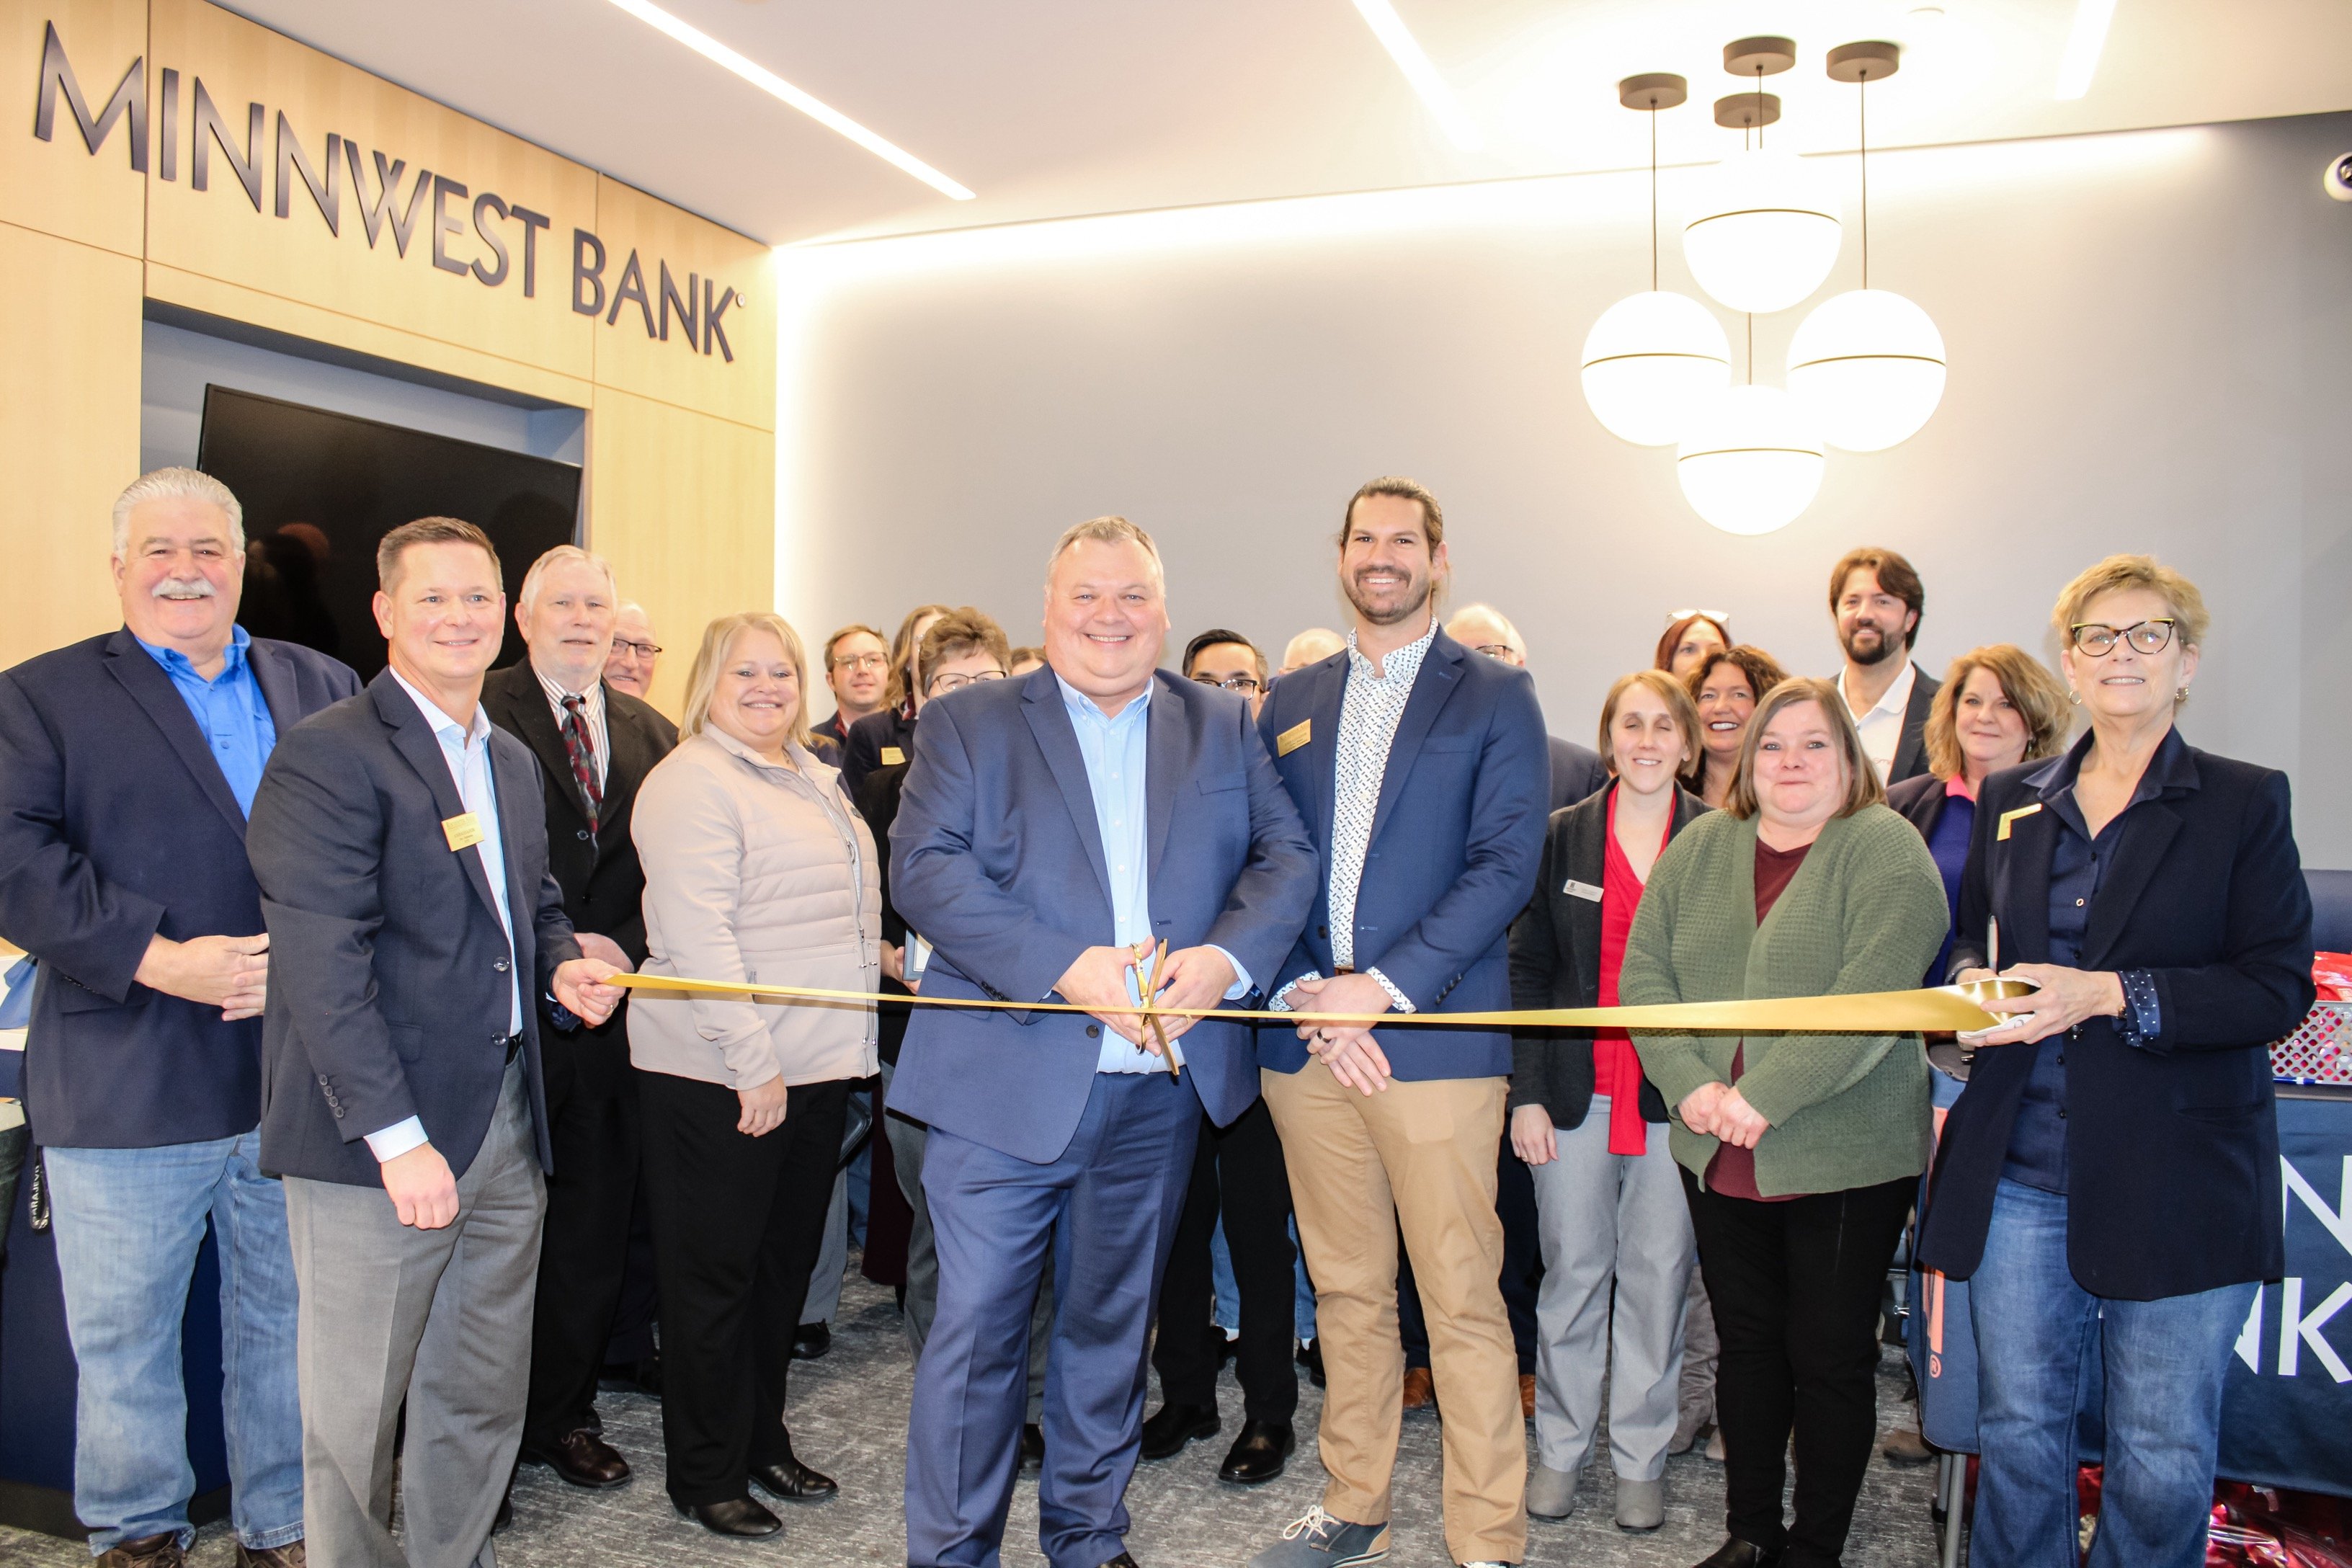 Minnwest Bank celebrates grand opening of newly relocated branch in Rochester